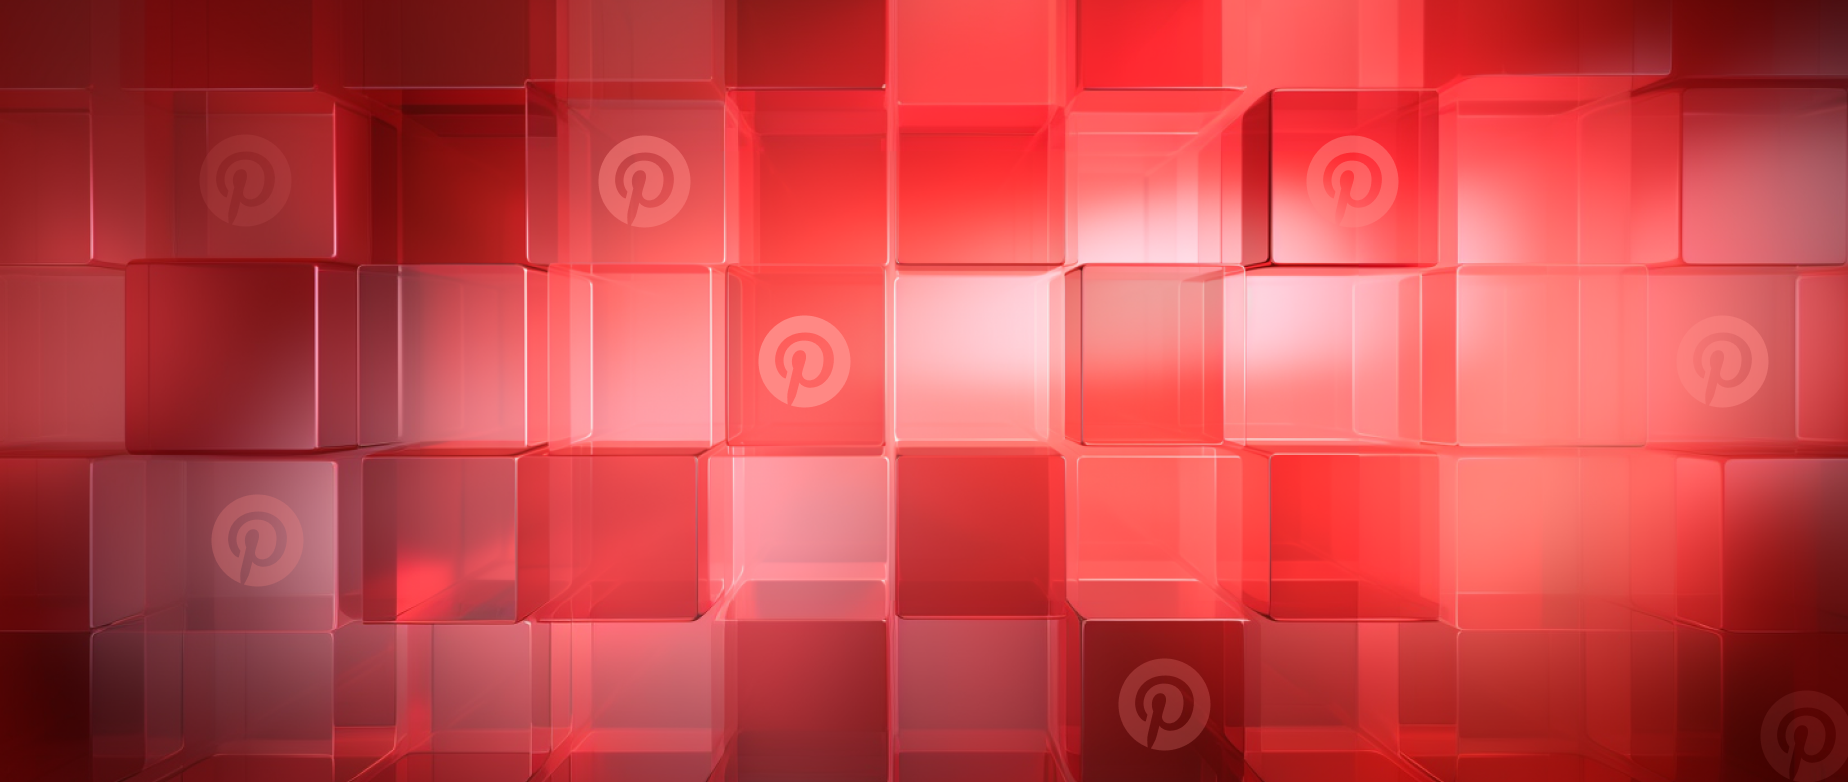 banner in red showing Pinterest logo